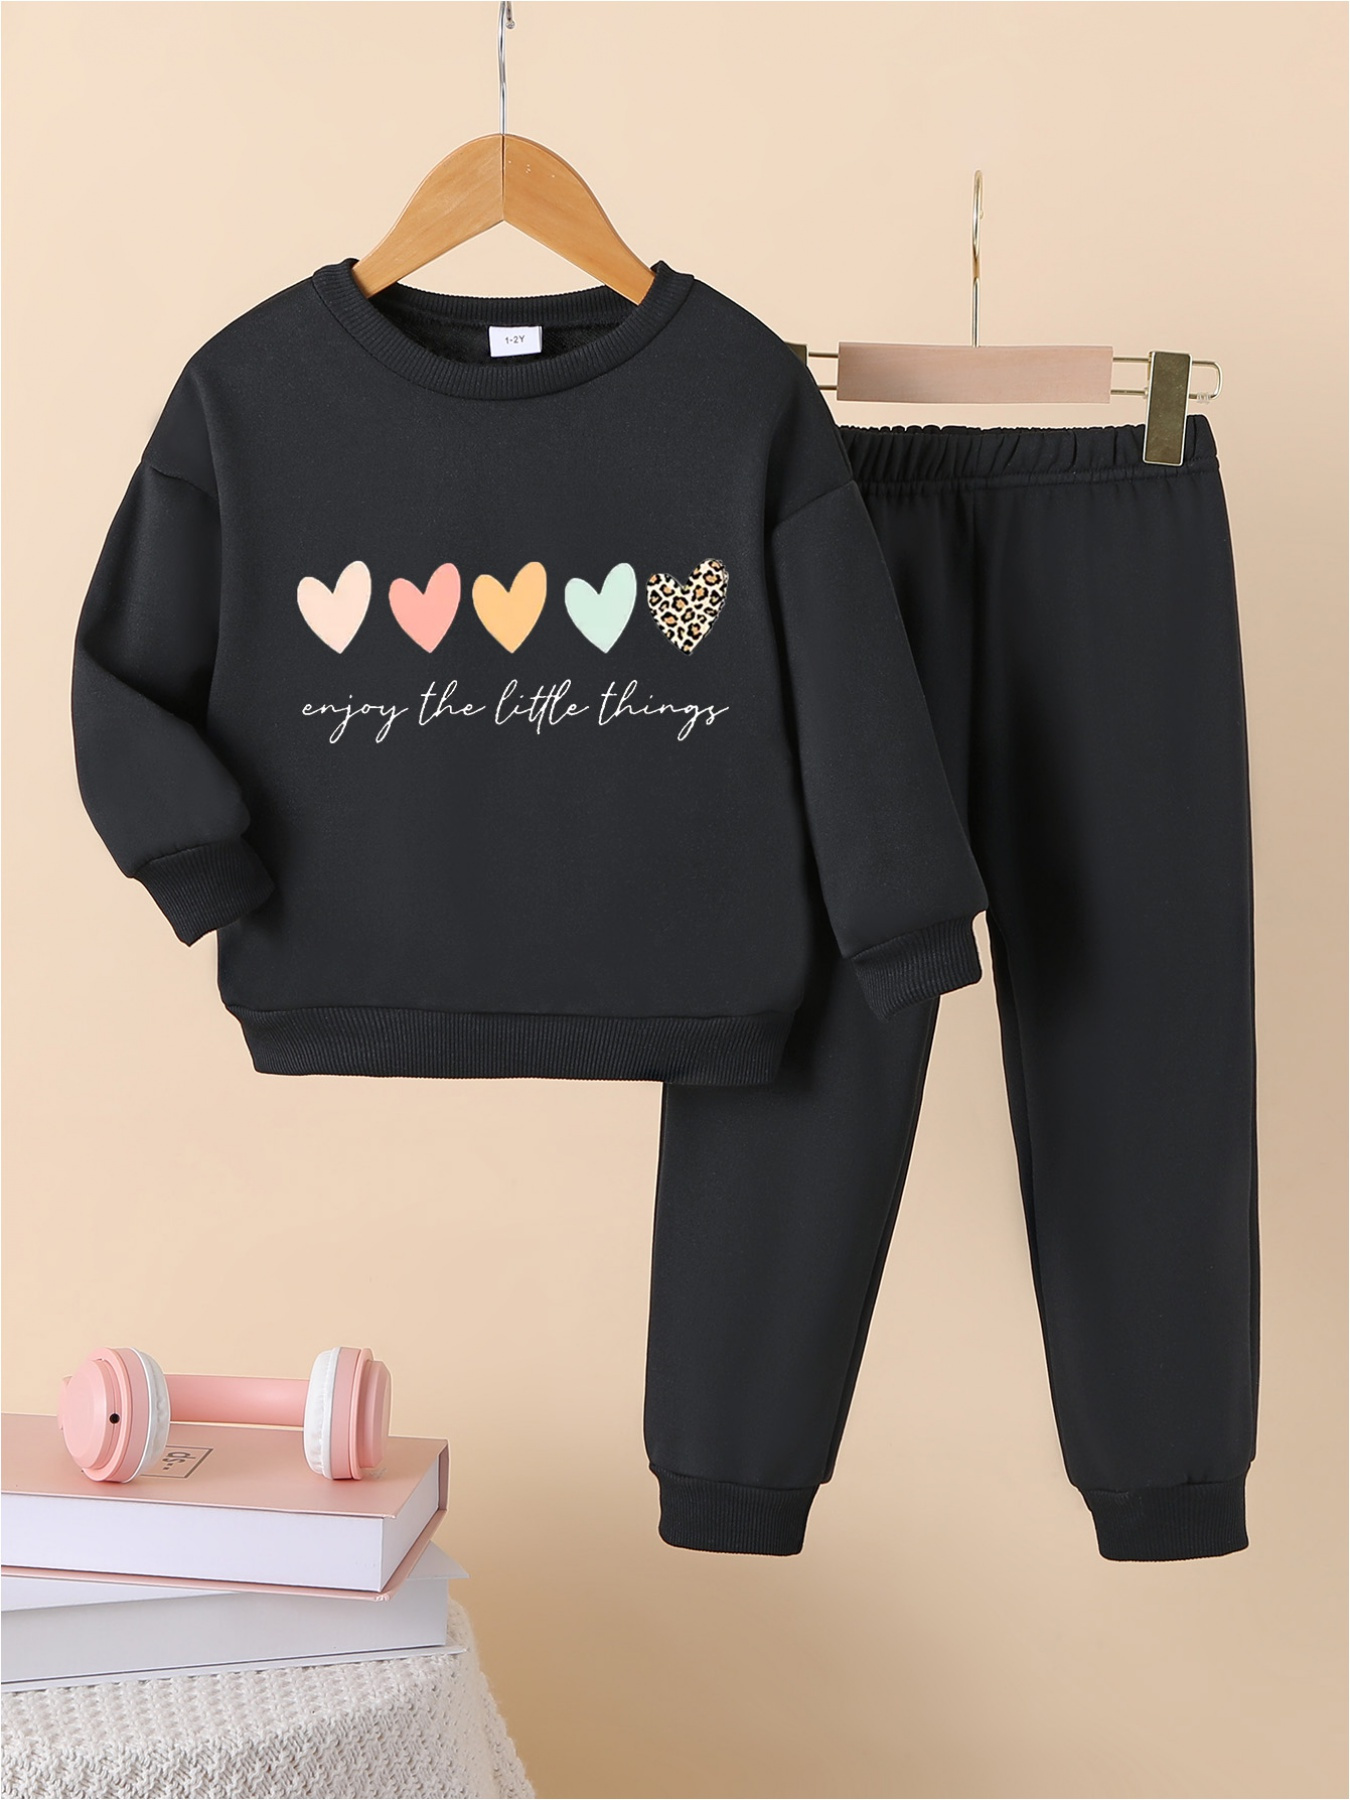 2pcs Girl's Heart Jacquard Outfit, Hoodie & Sweatpants Set, Casual Hooded  Long Sleeve Top, Kid's Clothes For Spring Fall